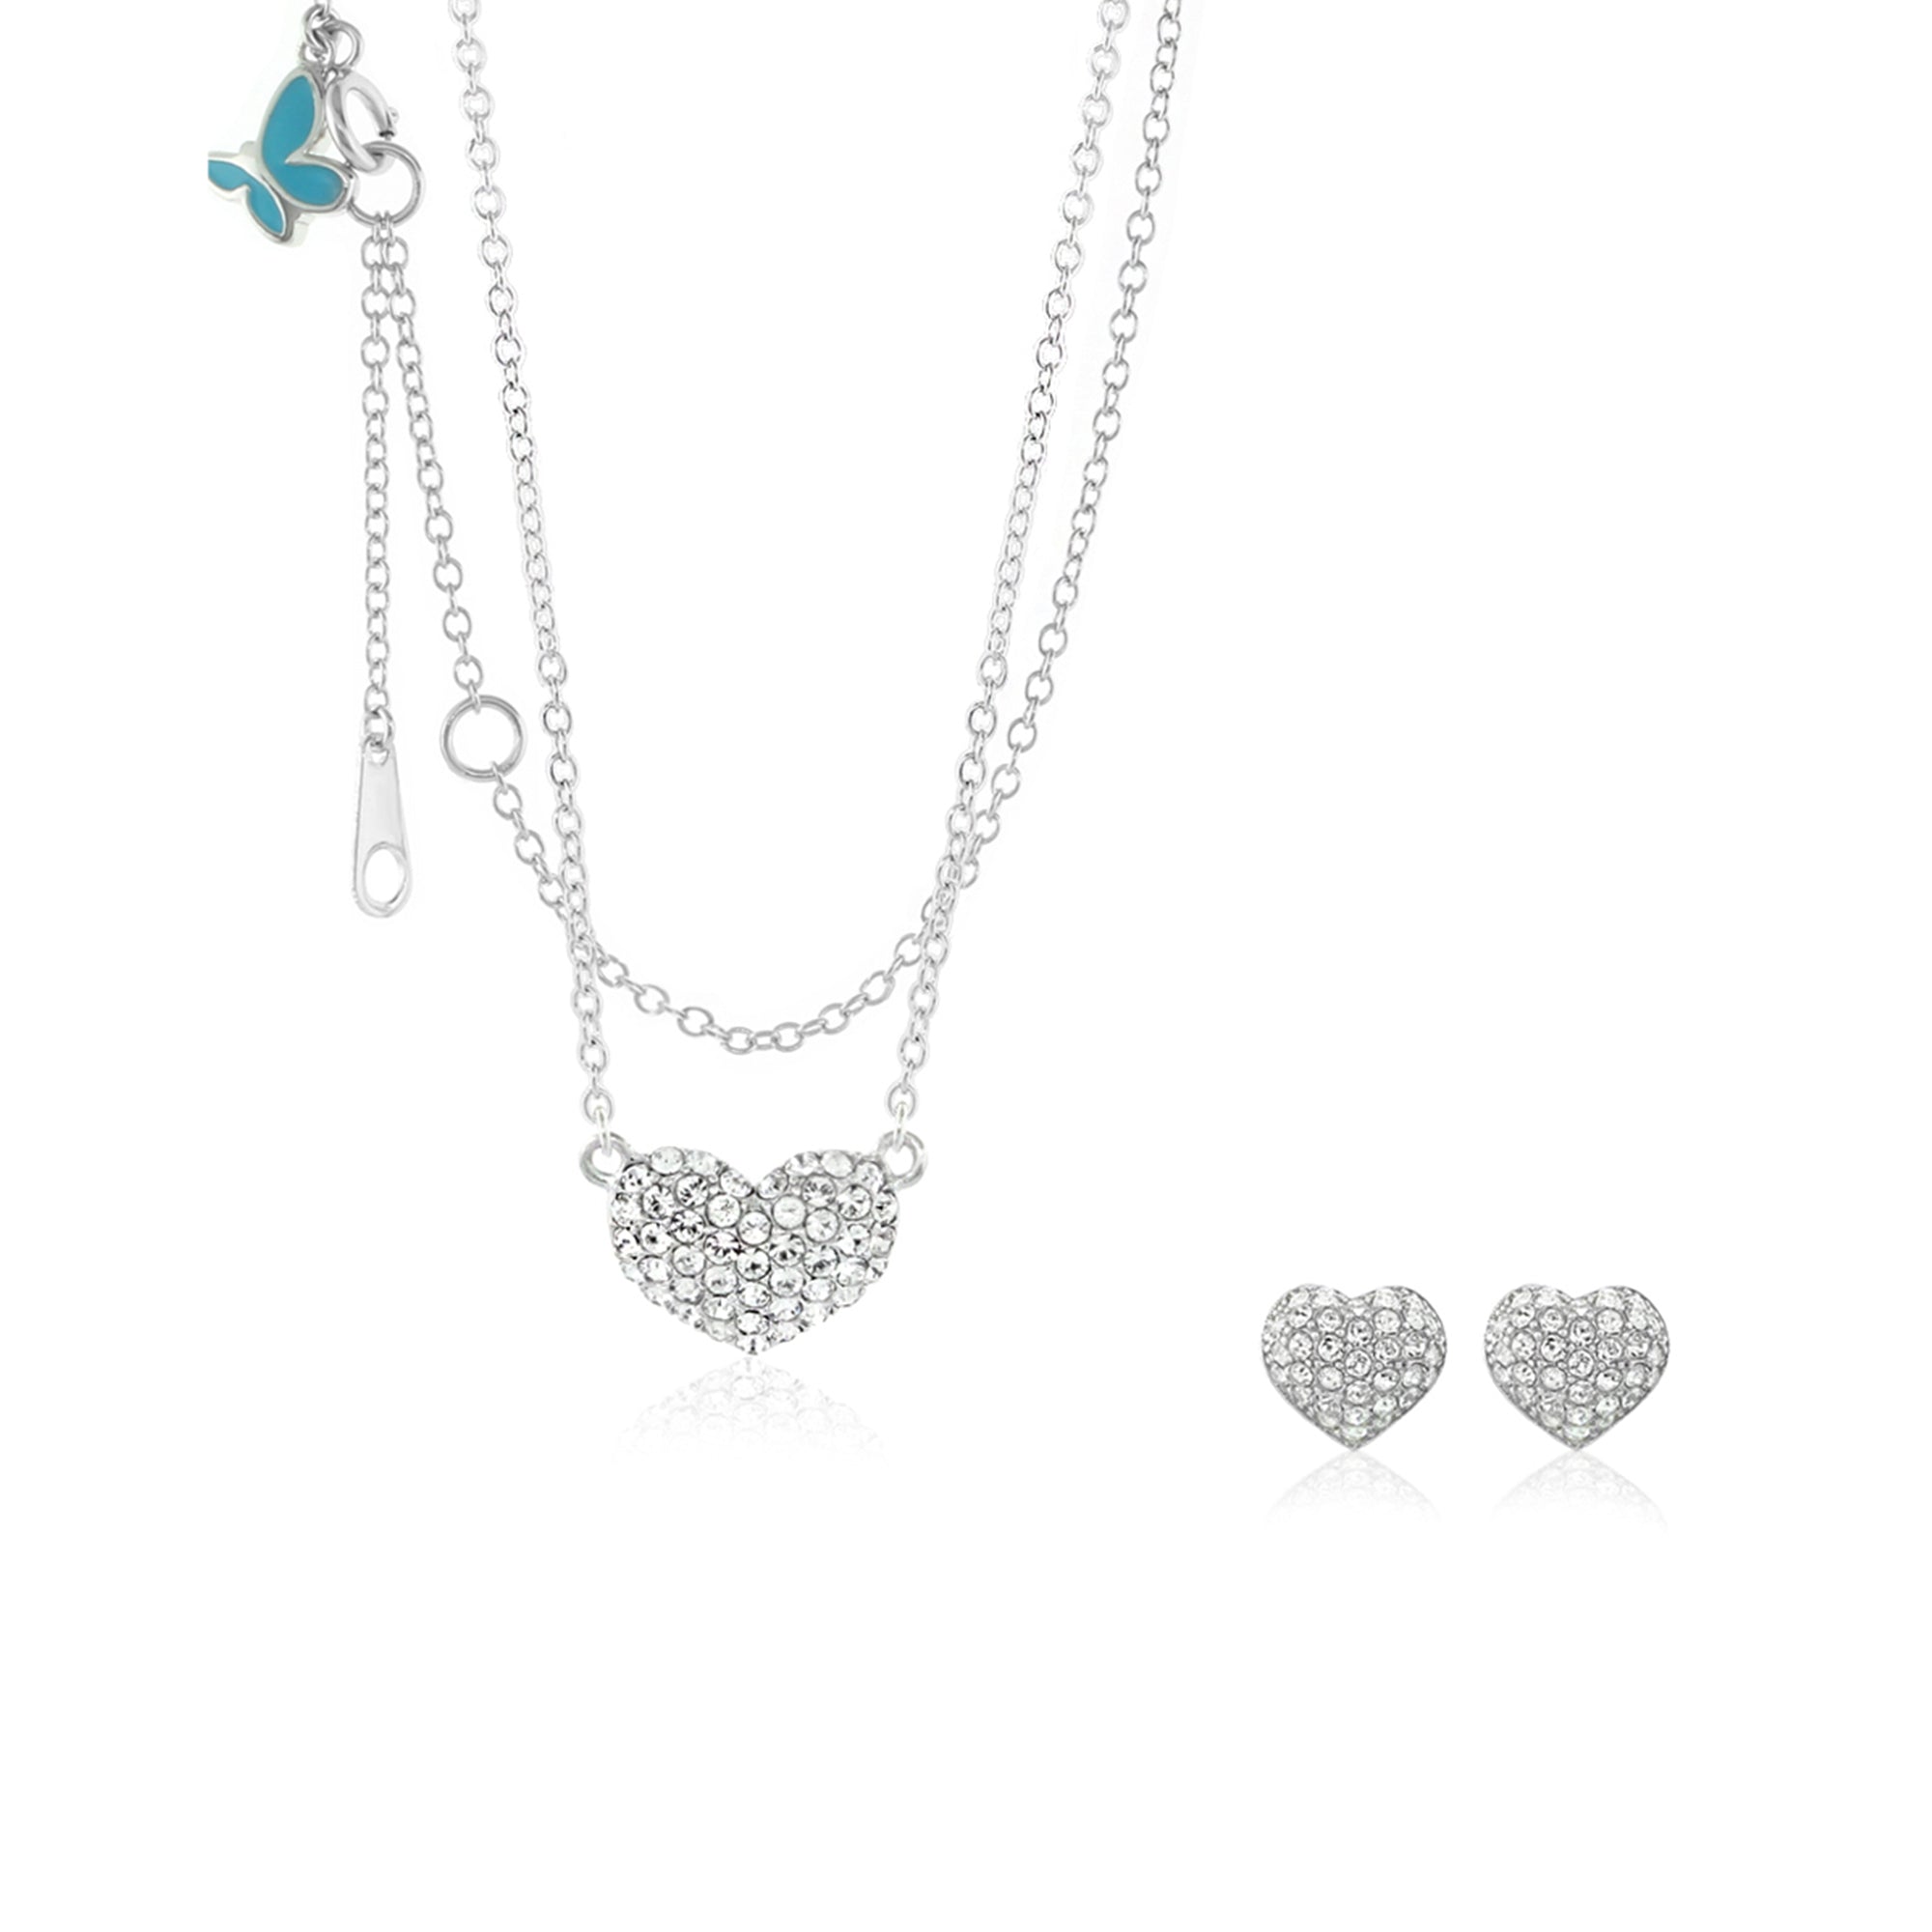 Sydney Leigh Pave Heart Pave Necklace & Earrings Set